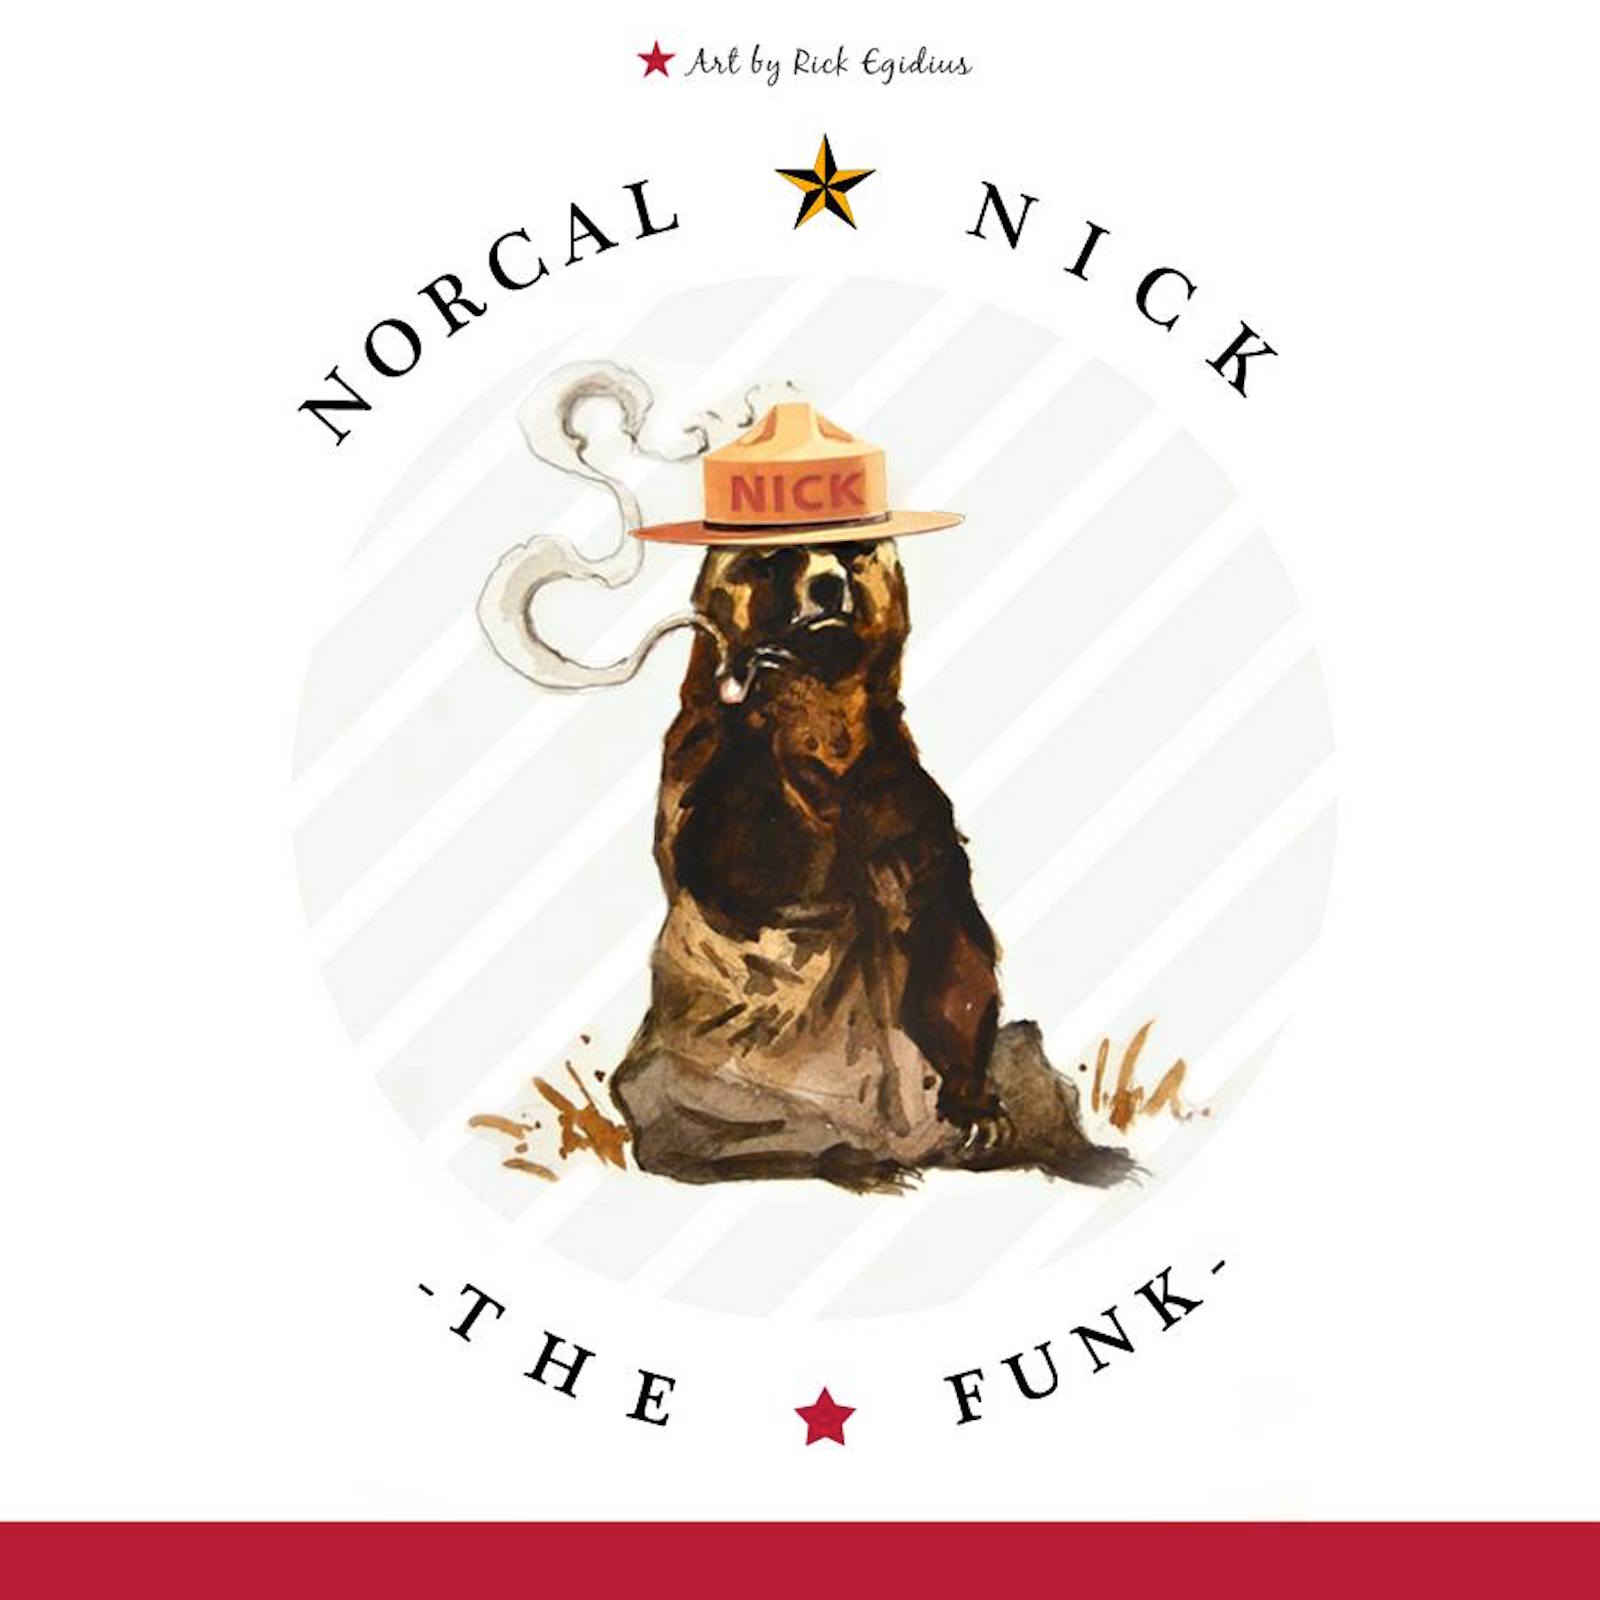 Swerve 916 Changes Name To NORCAL NICK, Release “The Funk”